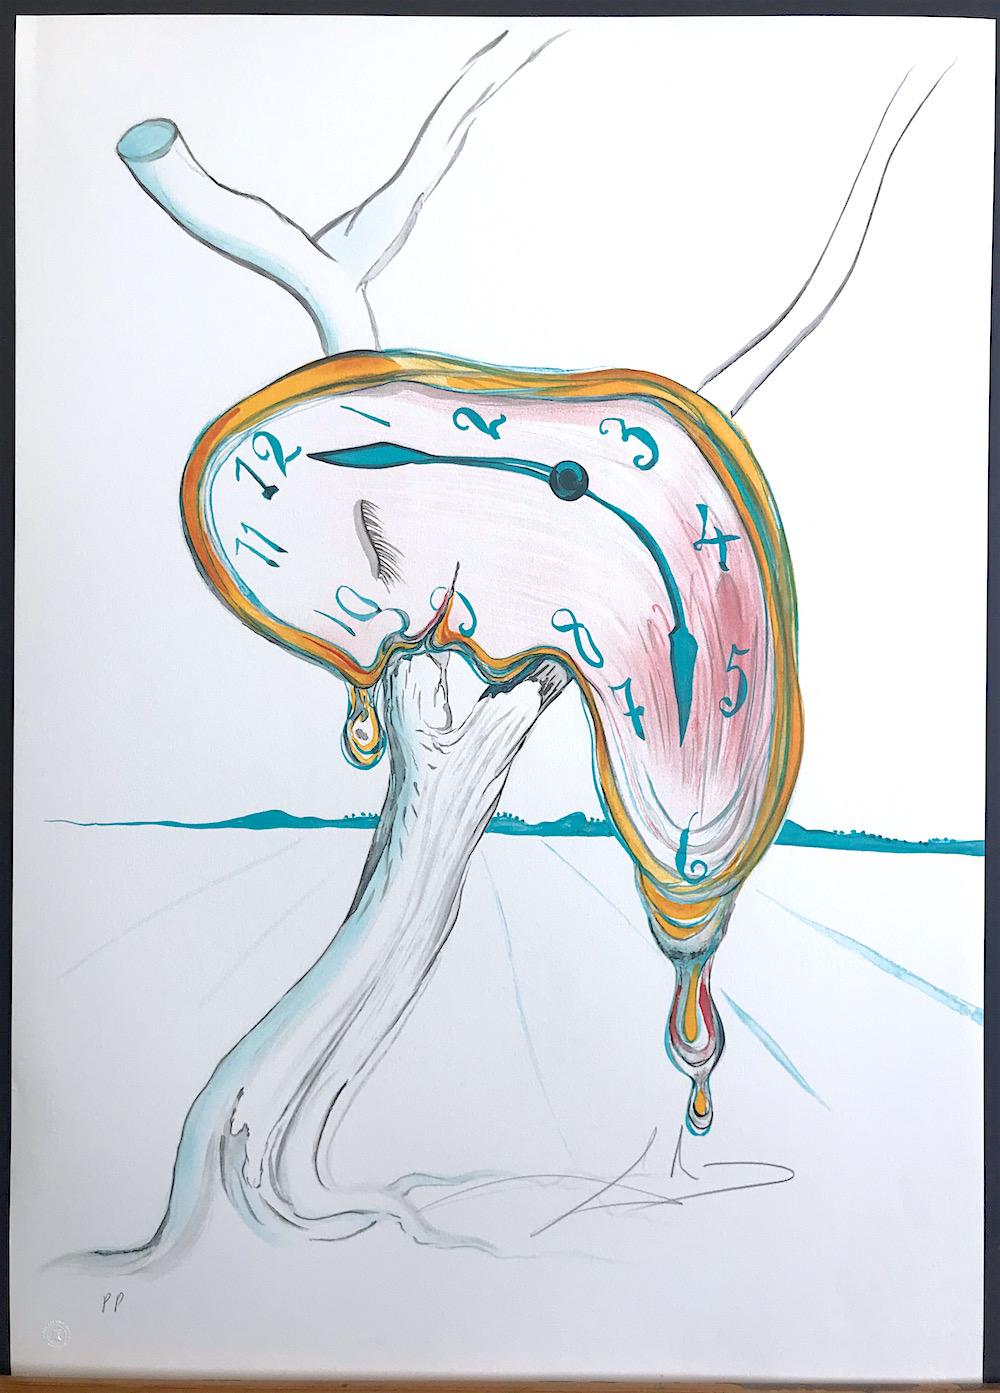 TEAR OF TIME Melting Clock, Hand Signed Lithograph on Arches Paper, Surrealism - Surrealist Print by Salvador Dalí